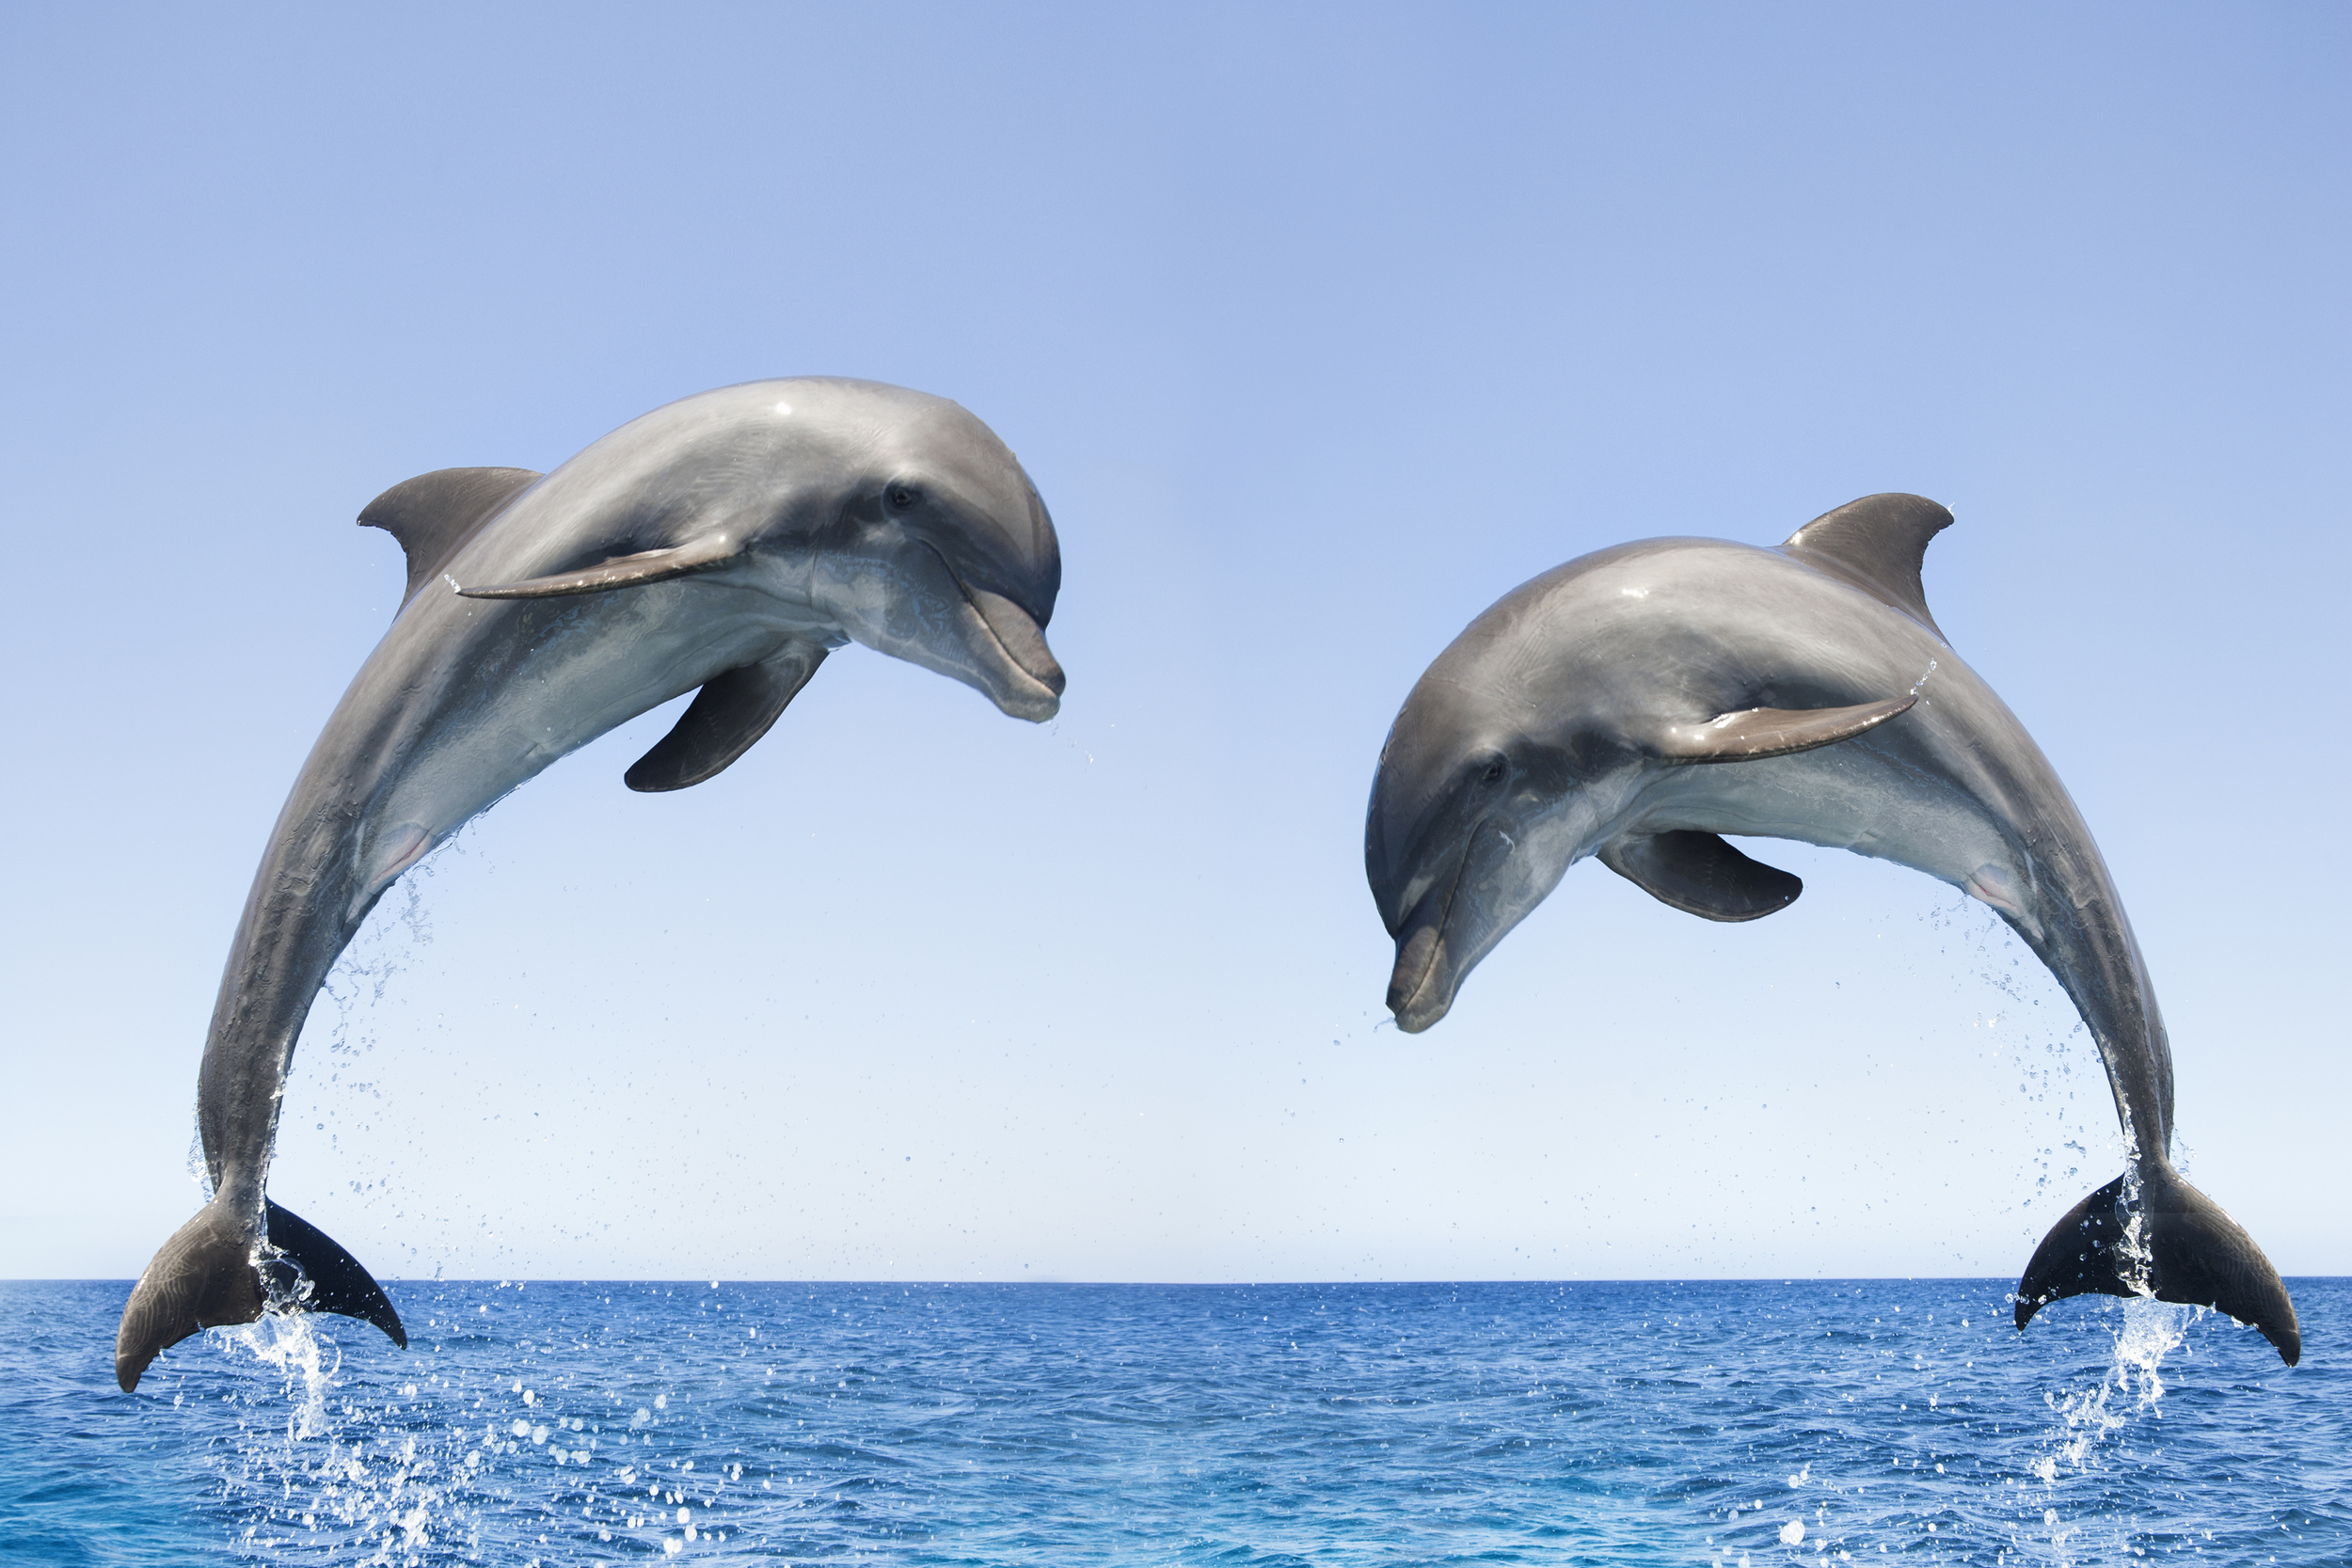 Dolphins communicate like humans see how